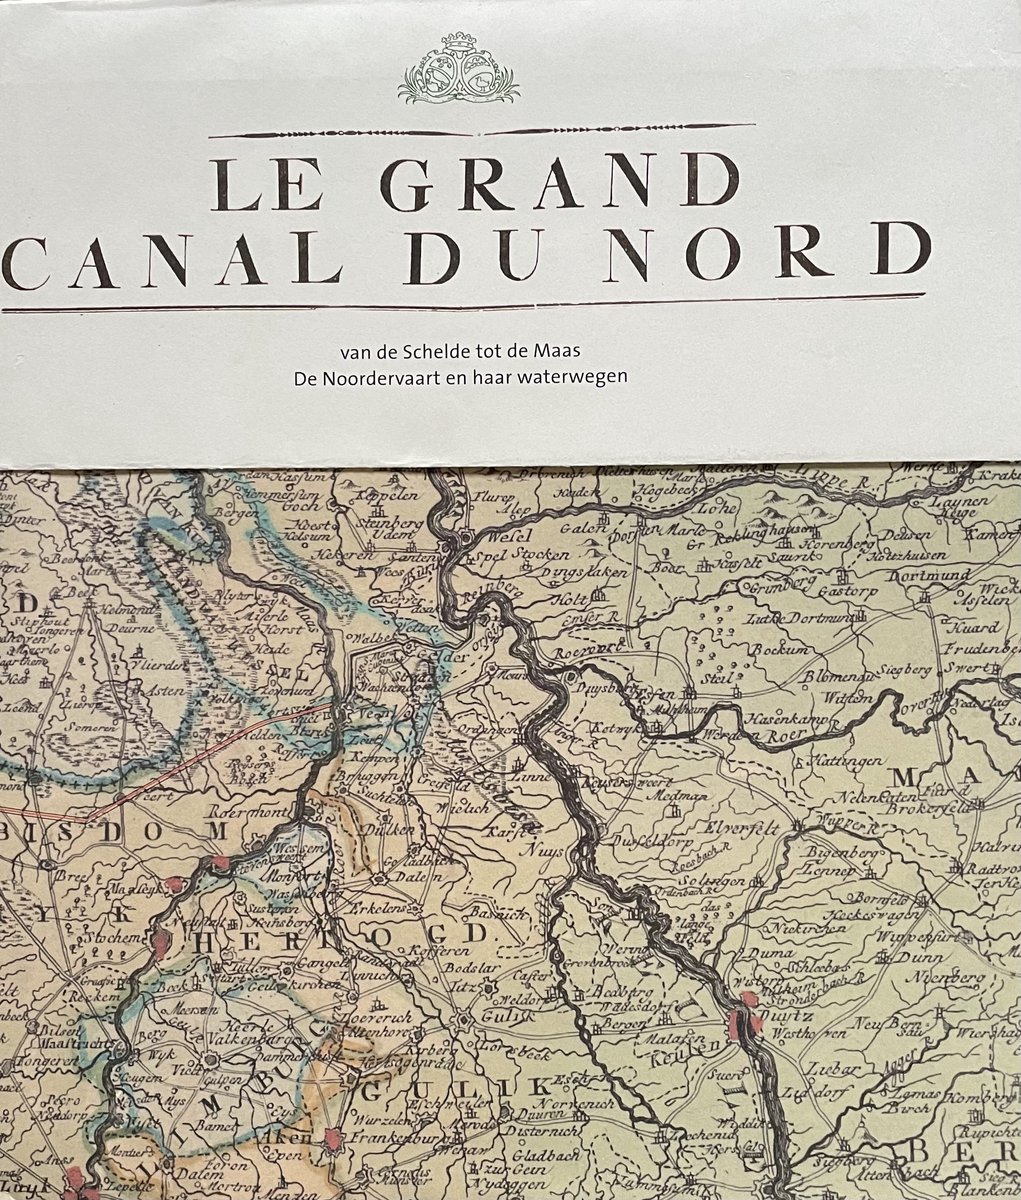 Le Grand Canal du Nord